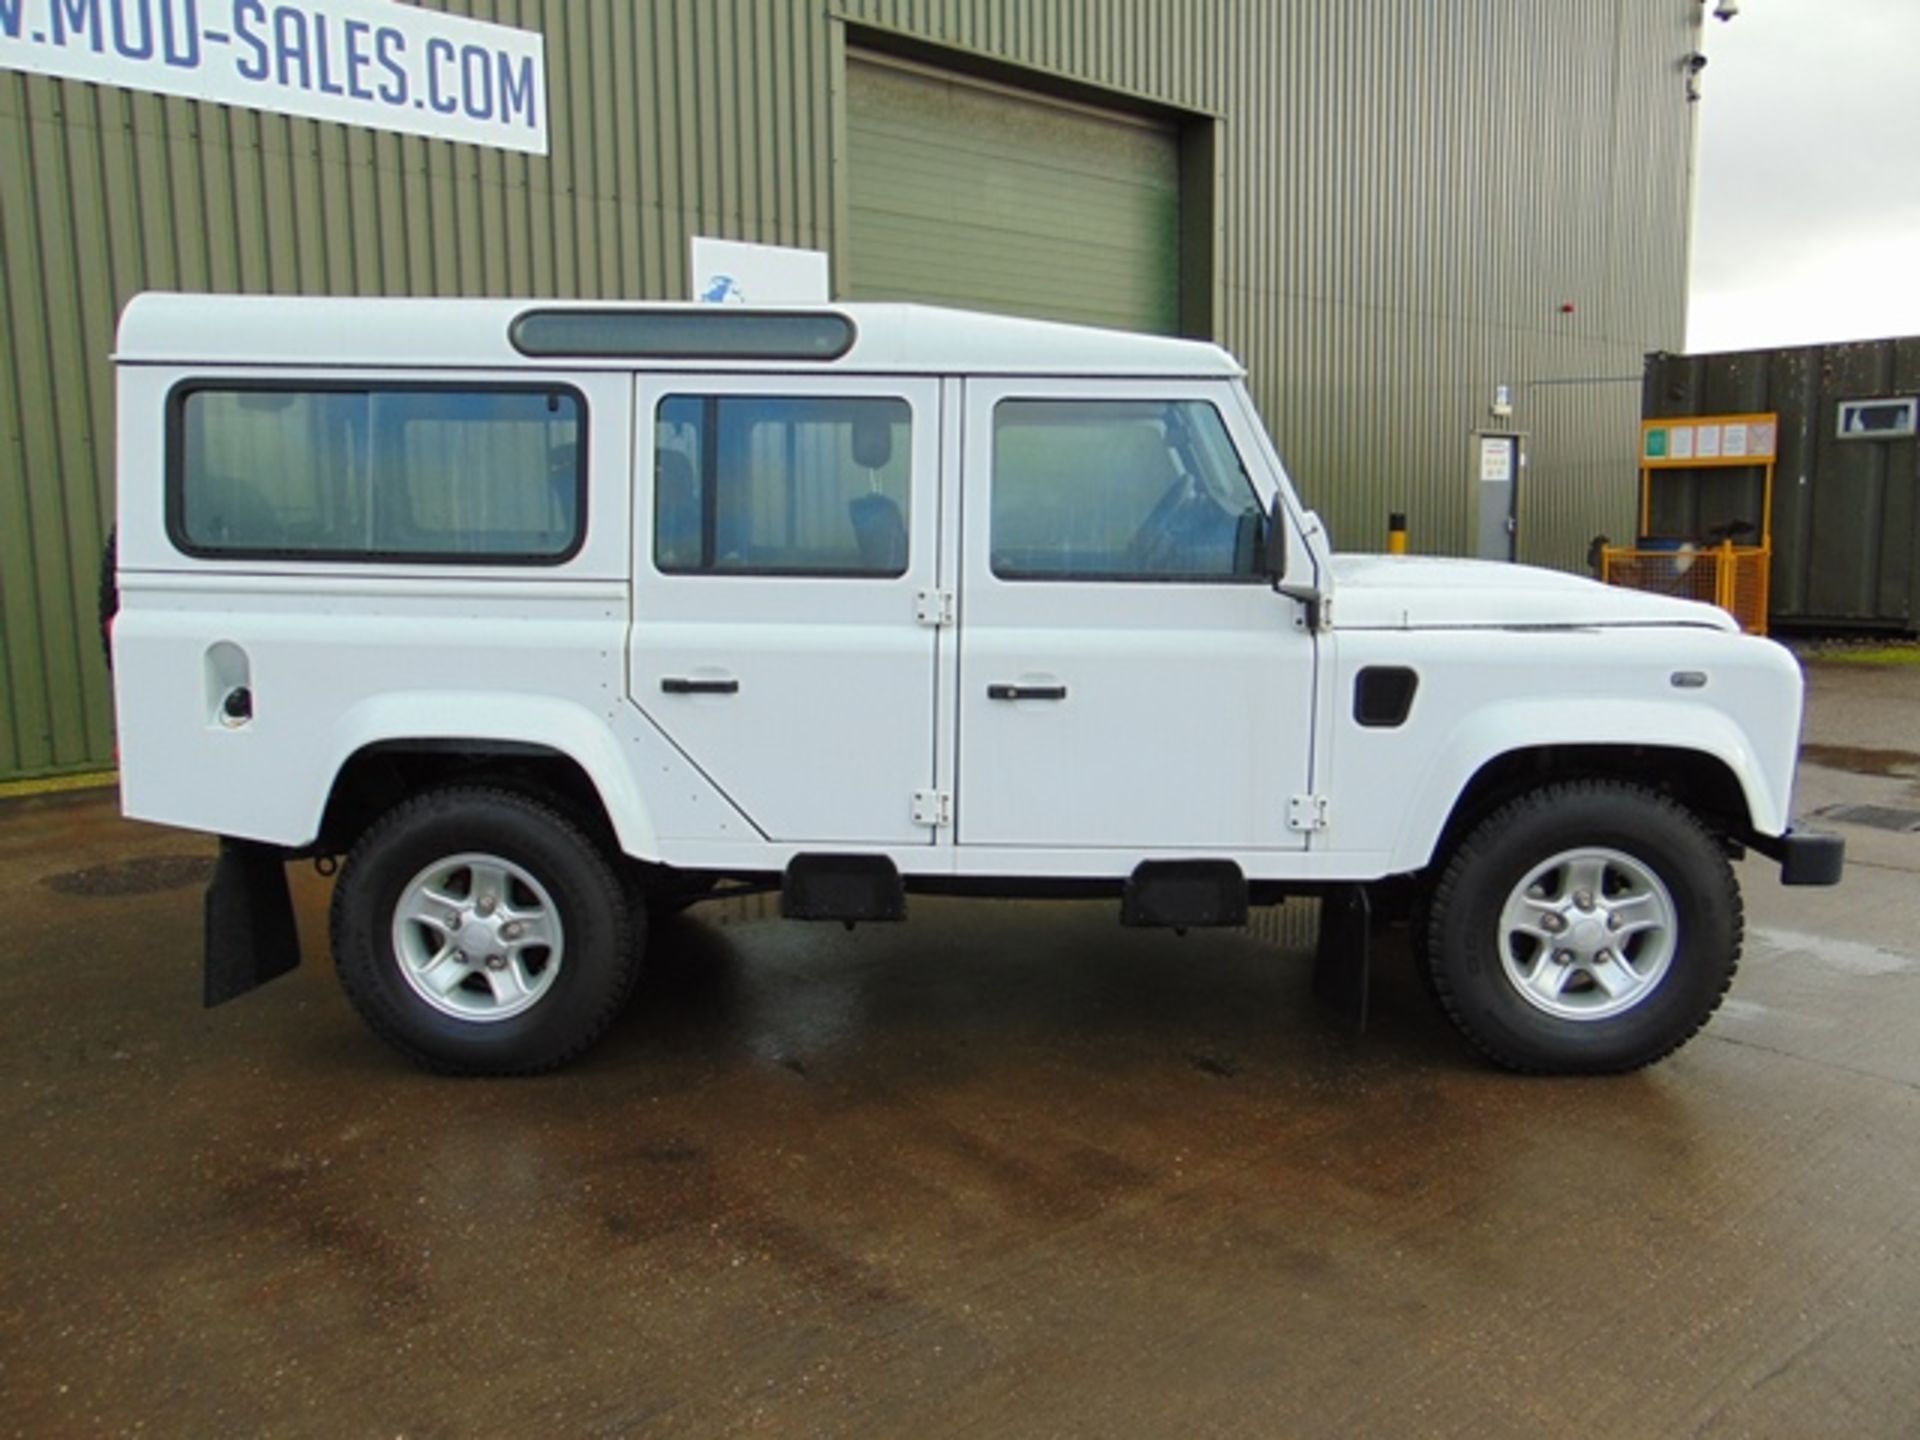 2015 Land Rover Defender 110 5 Door County Station Wagon ONLY 8,915 miles!!! - Image 6 of 24